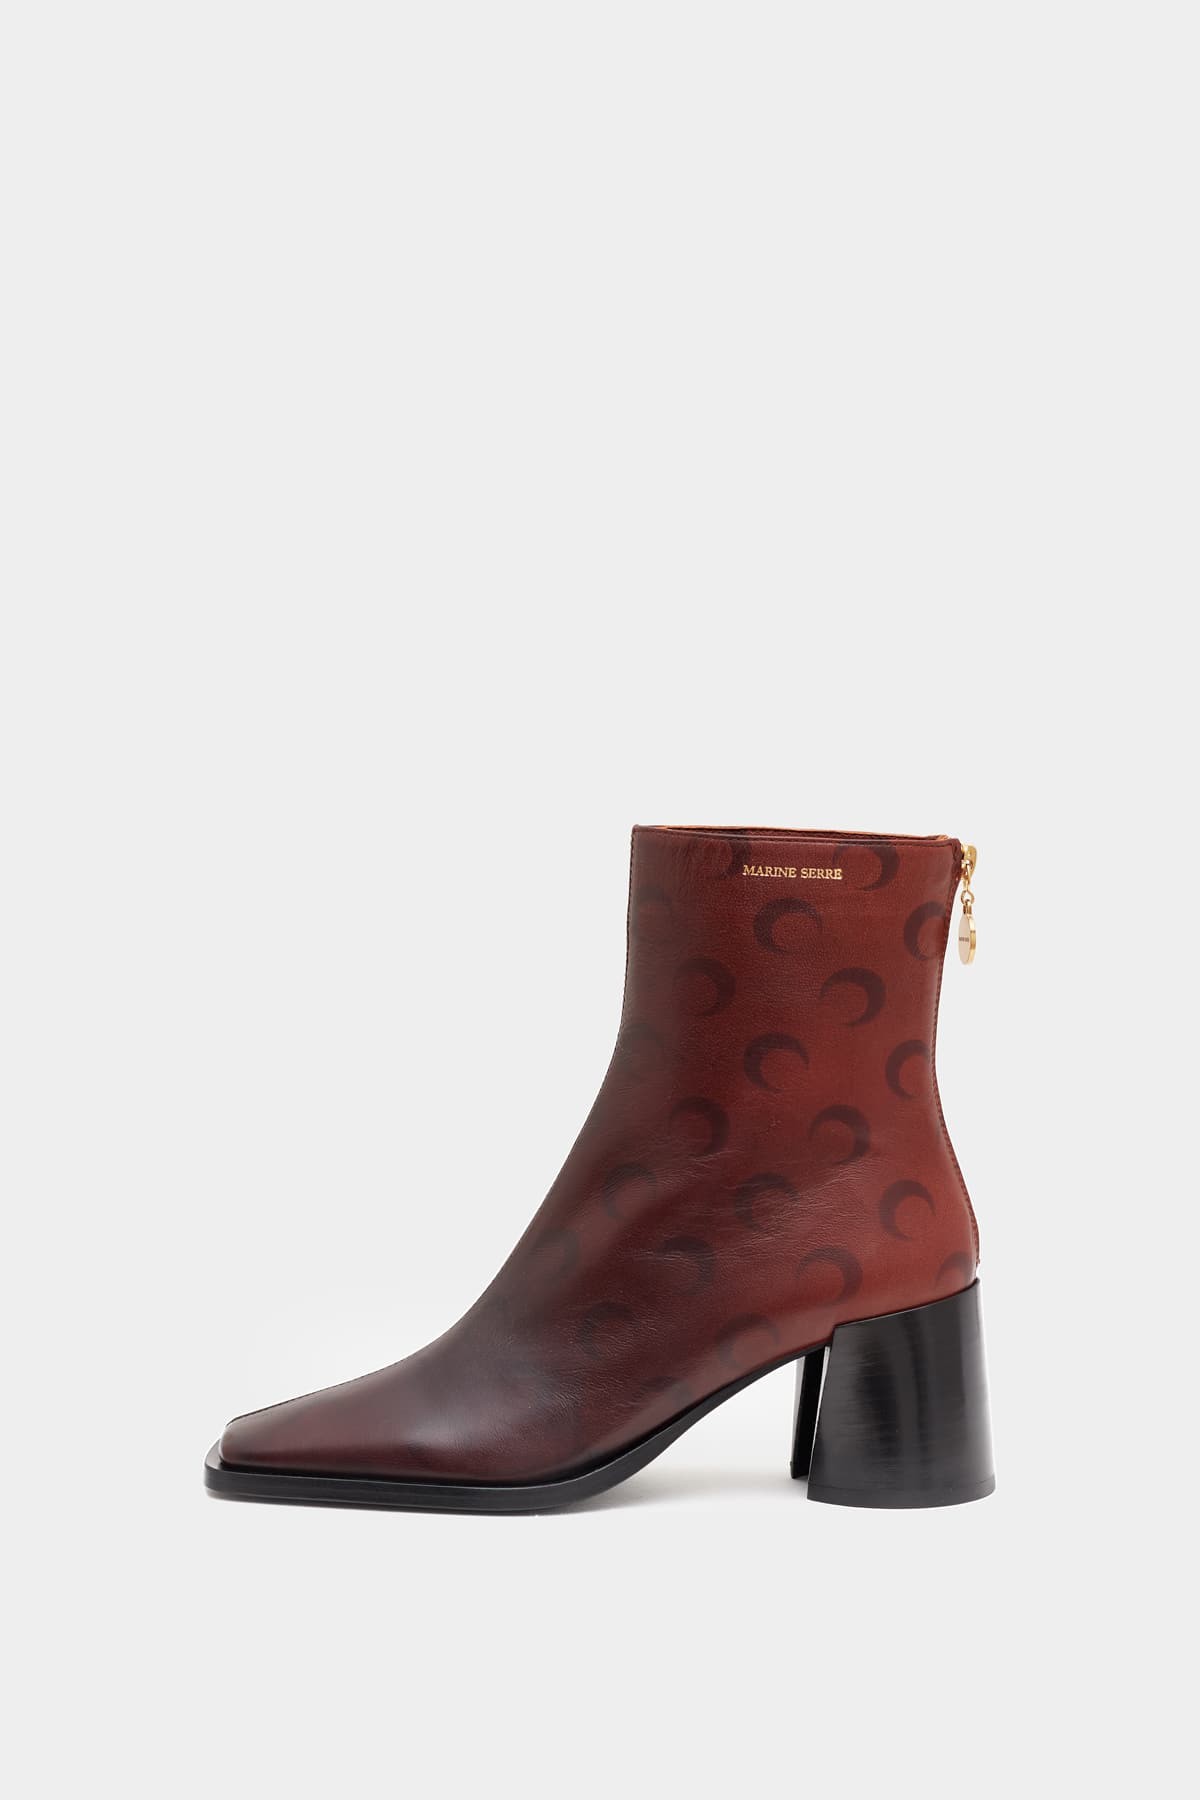 MARINE SERRE BROWN AIRBRUSHED CRAFTED LEATHER ANKLE BOOTS IAMNUE